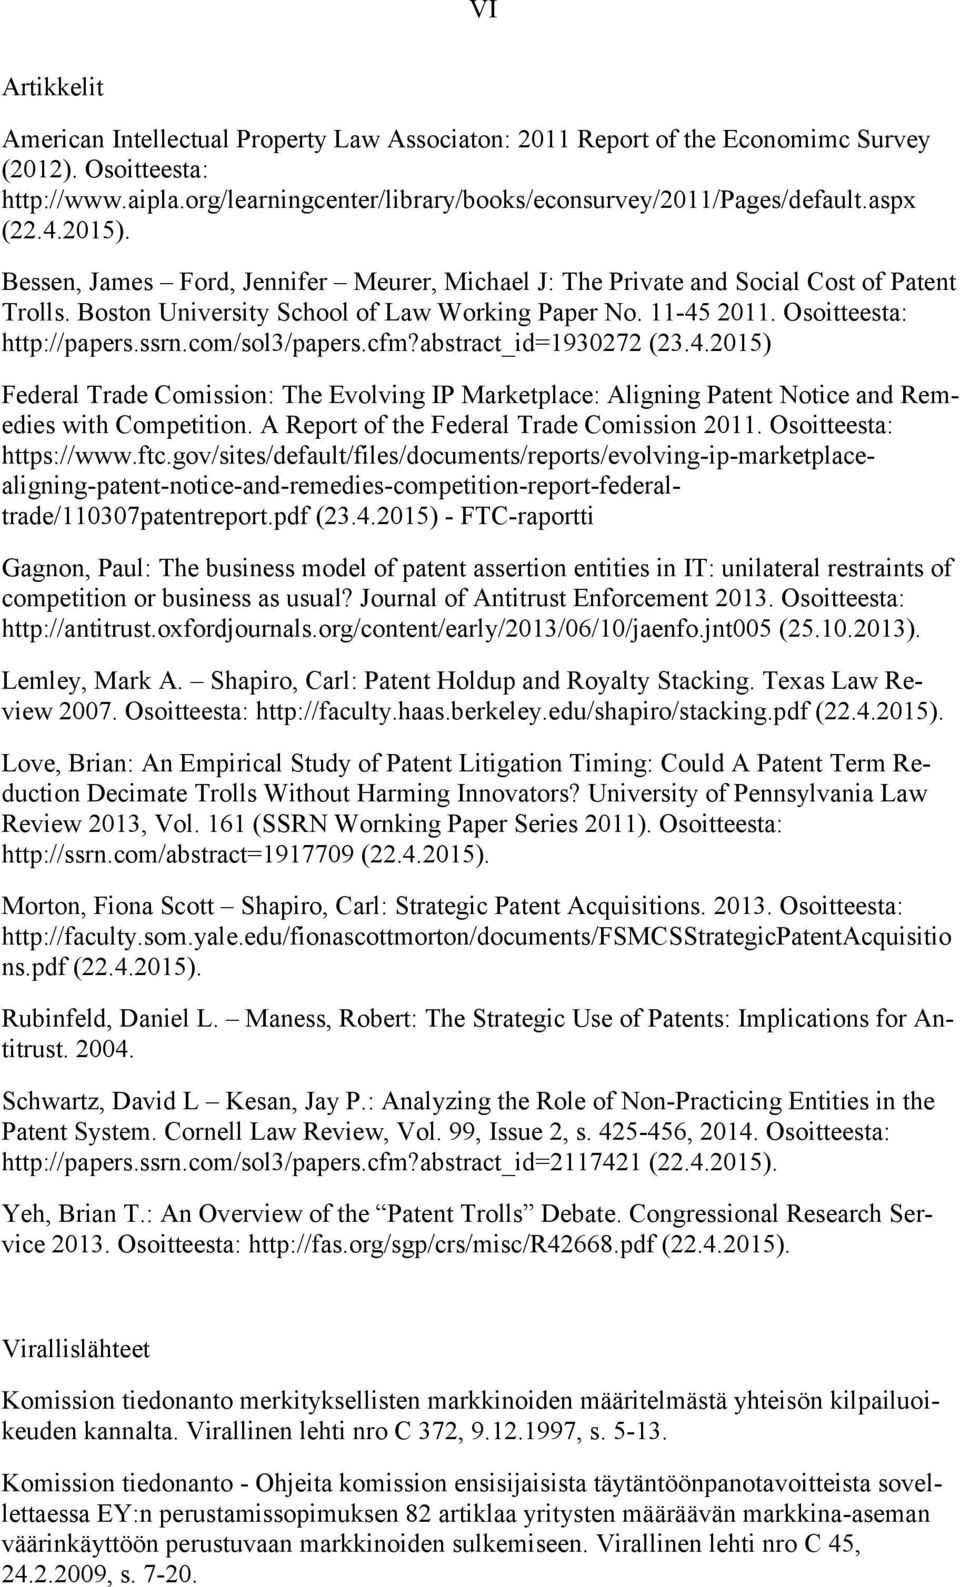 Osoitteesta: http://papers.ssrn.com/sol3/papers.cfm?abstract_id=1930272 (23.4.2015) Federal Trade Comission: The Evolving IP Marketplace: Aligning Patent Notice and Remedies with Competition.